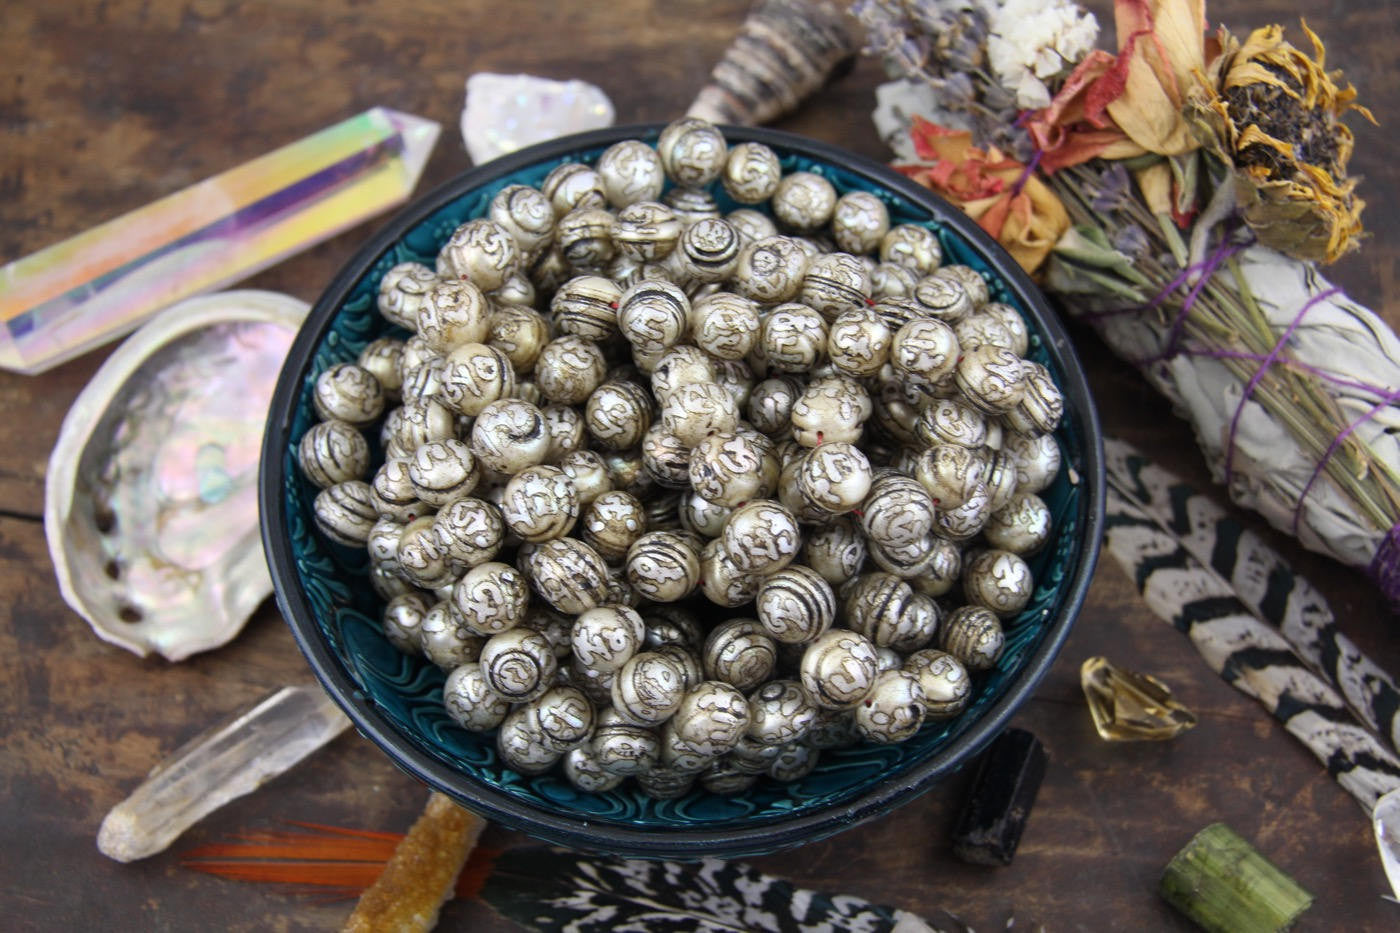 Pearly Om: 10 Silver Grey Loose Engraved Pearl Beads 11x13mm - ShopWomanShopsWorld.com. Bone Beads, Tassels, Pom Poms, African Beads.